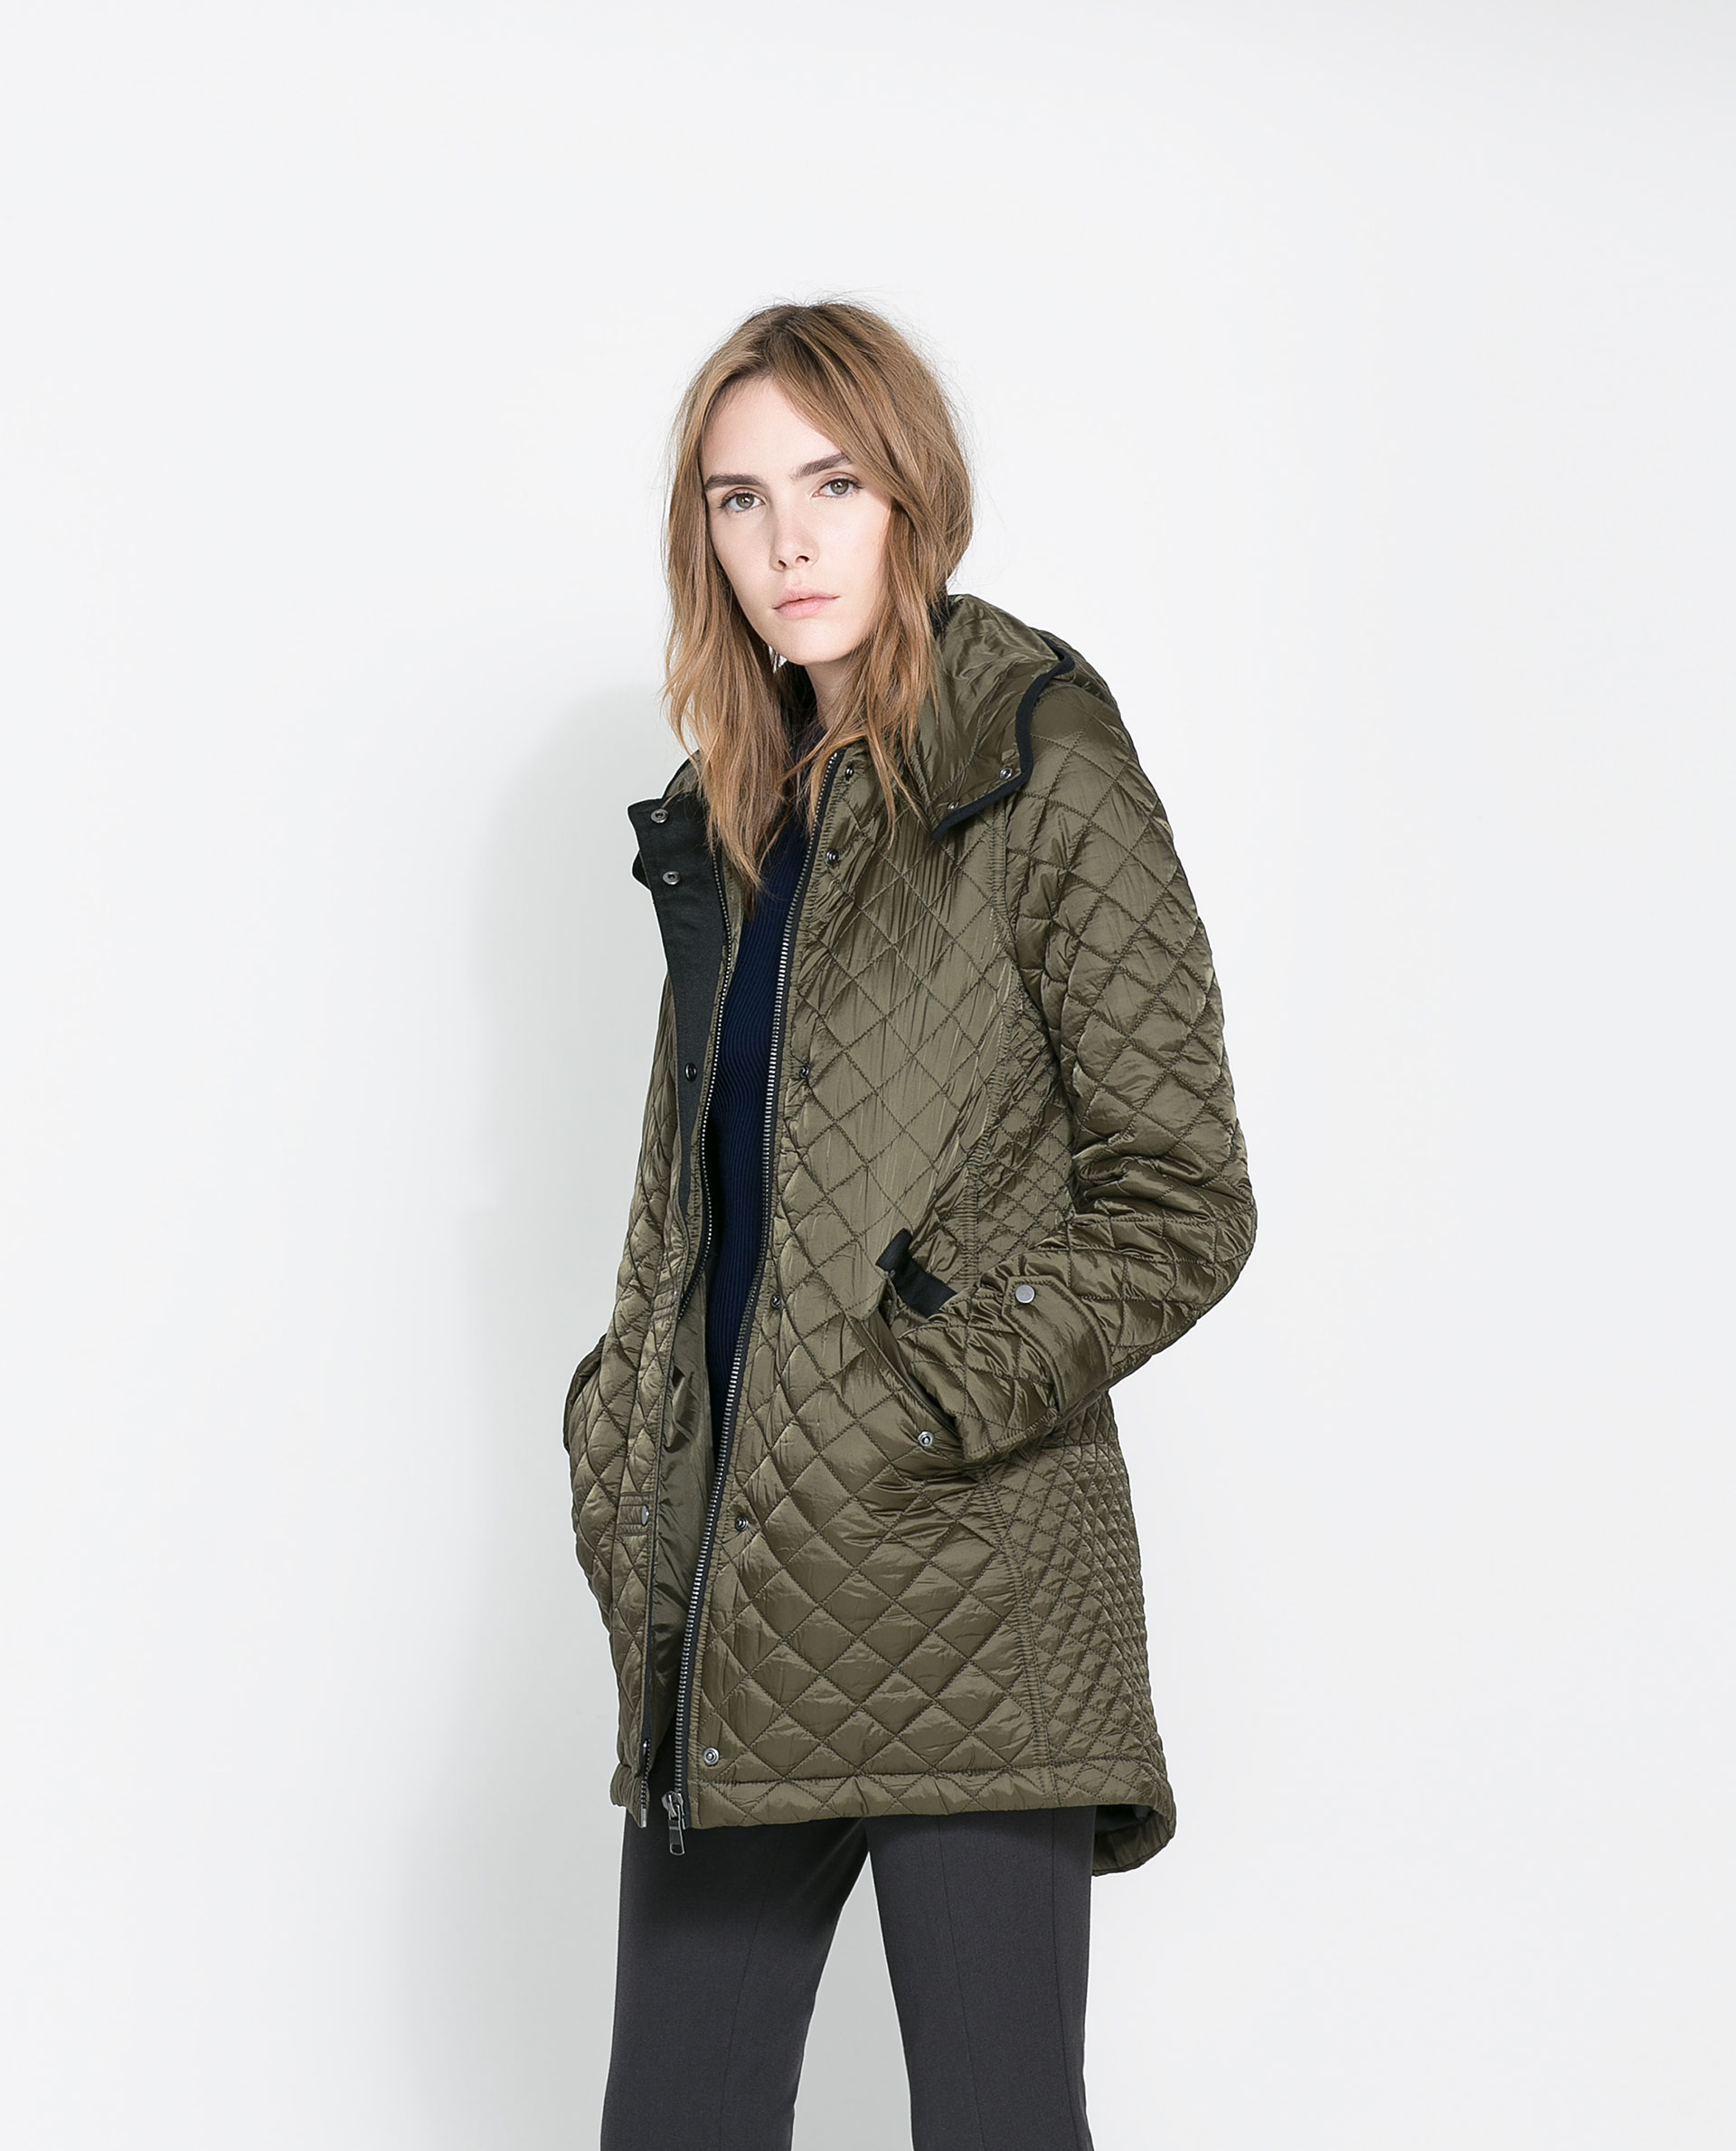 Zara Girls Size Military Green Quilted Jacket No | Hot Sex Picture